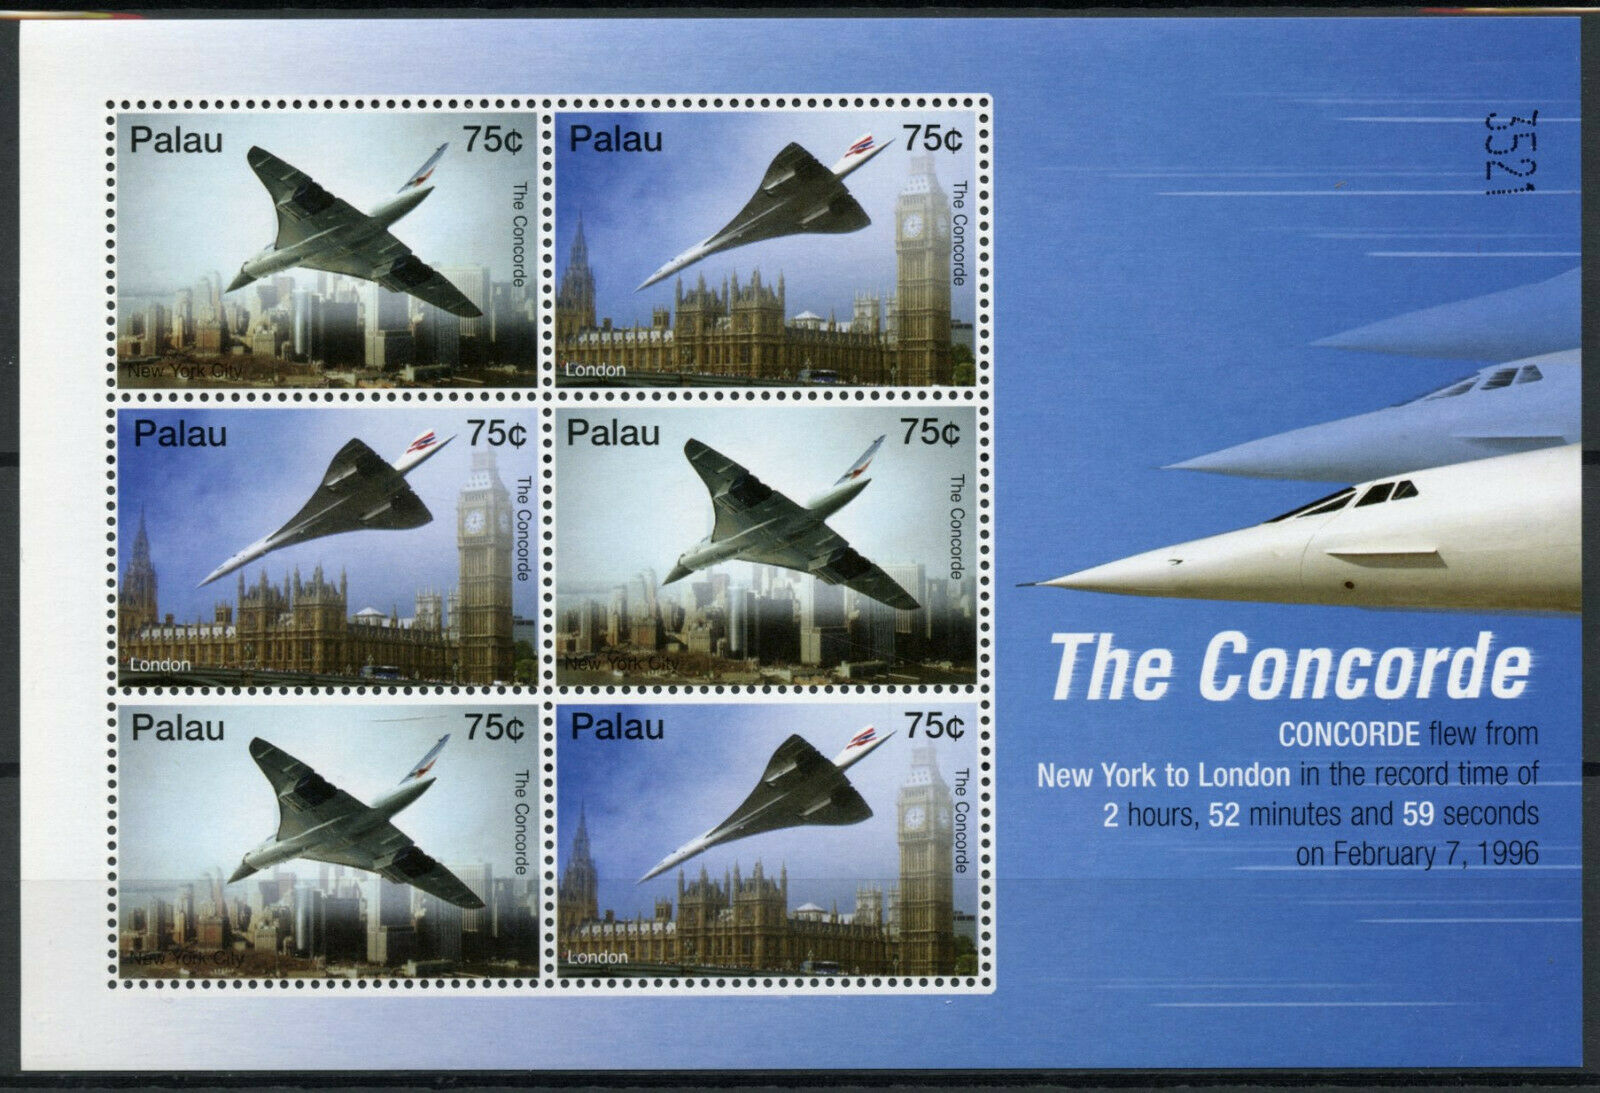 Palau Concorde Stamps 2006 MNH New York London Record Big Ben Westminster 6v M/S